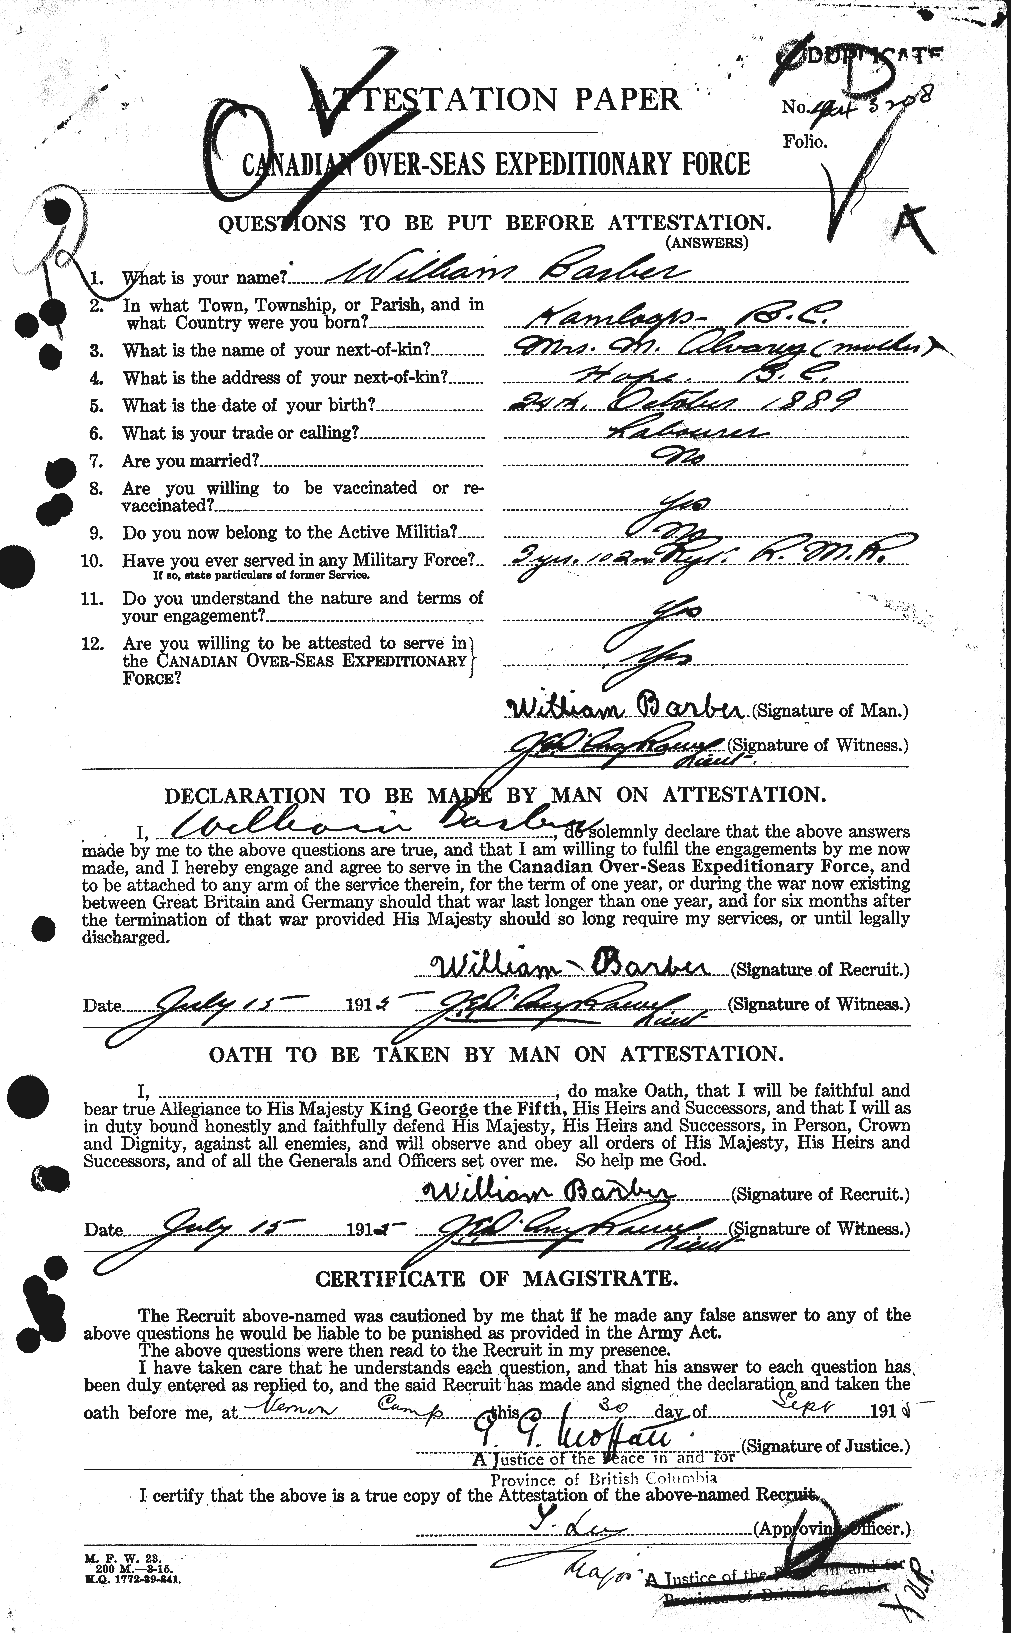 Personnel Records of the First World War - CEF 219023a